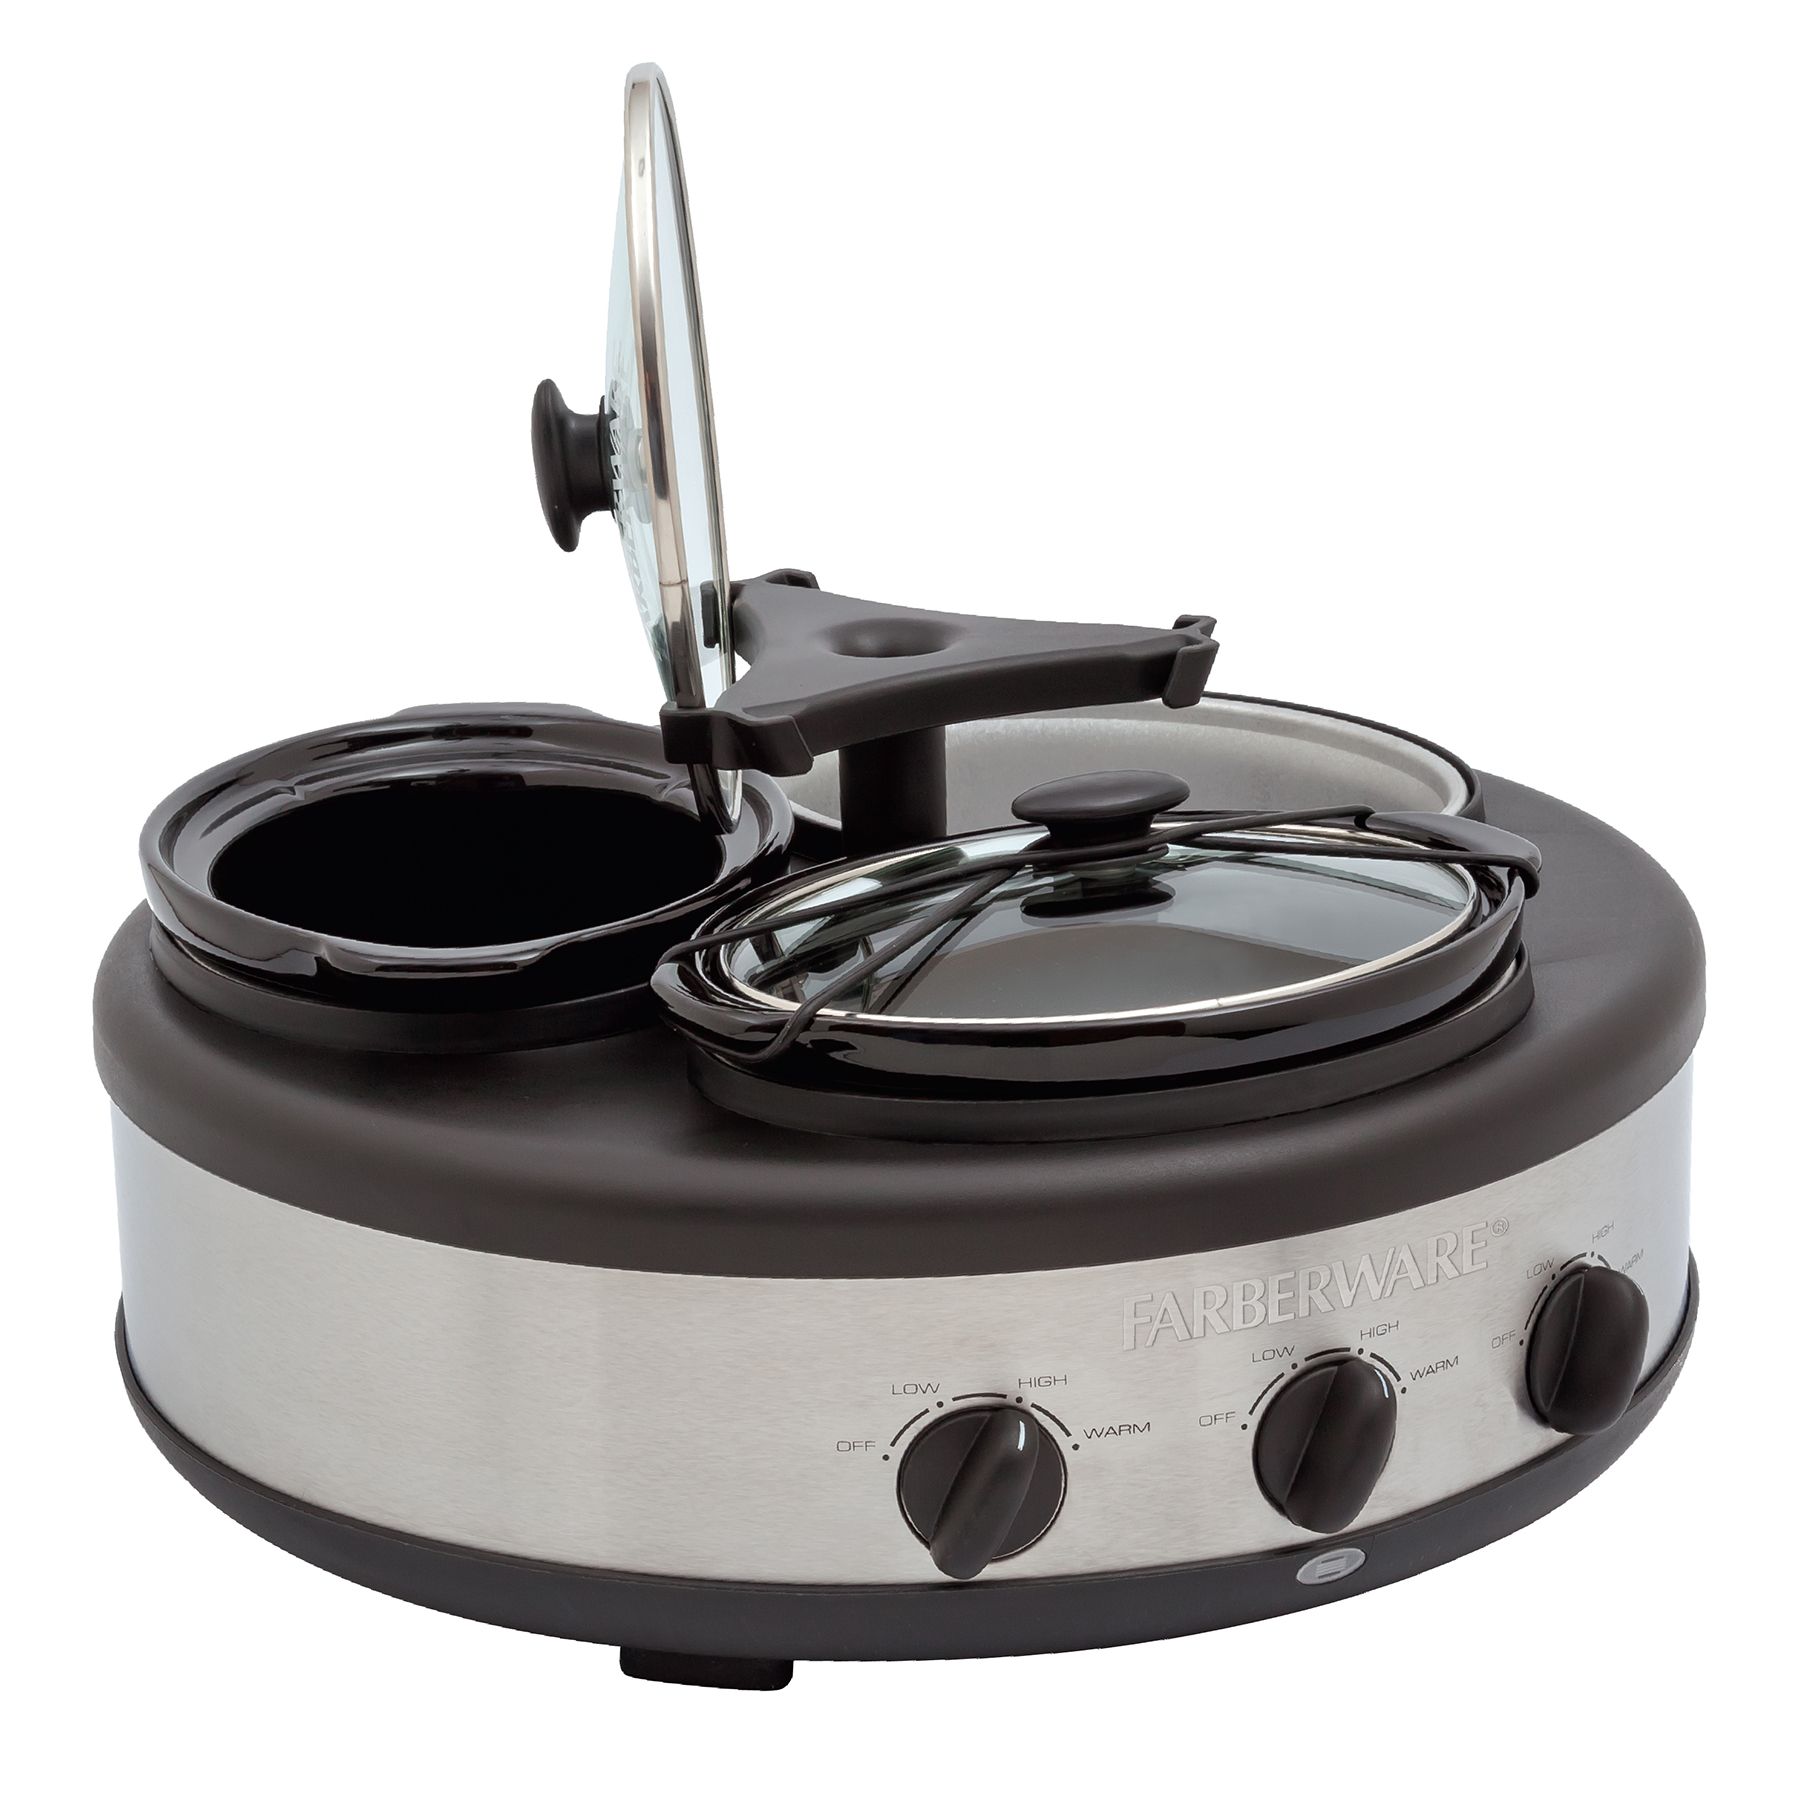 GE 3-Crock Slow Cooker Buffet: Perfect for Entertaining